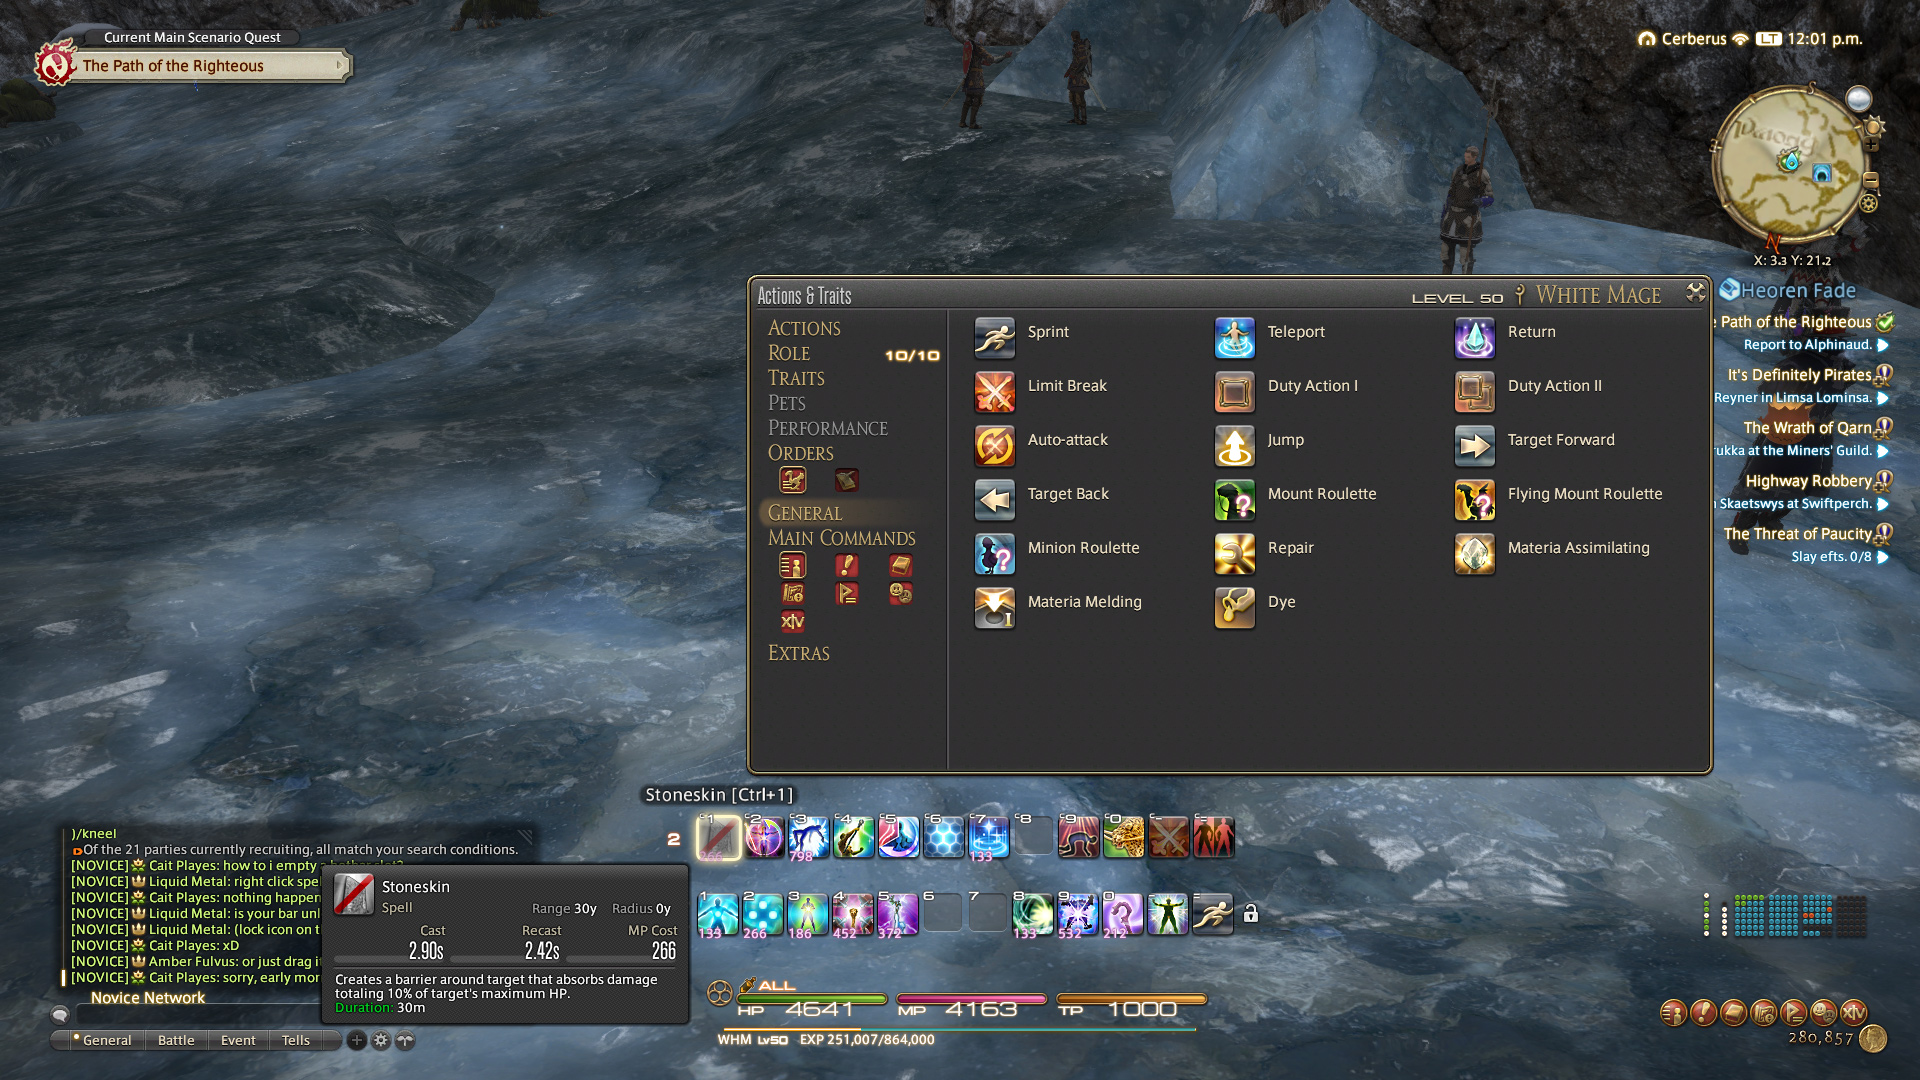 Final Fantasy XIV - Returning Eorzea 6 Years Later, The Ups and Downs of MMORPGs LH Yeung.net Blog